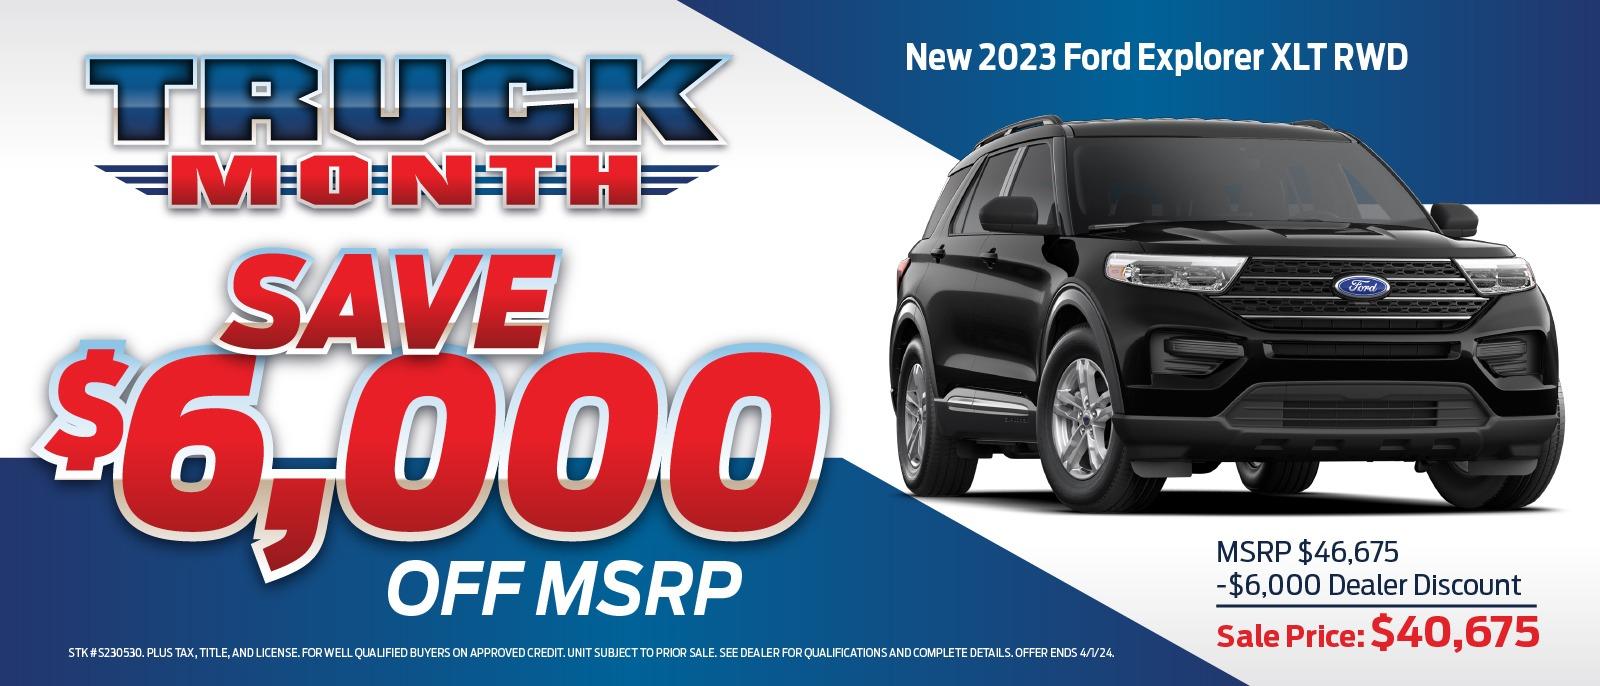 Ford Explorer Truck Month Special!